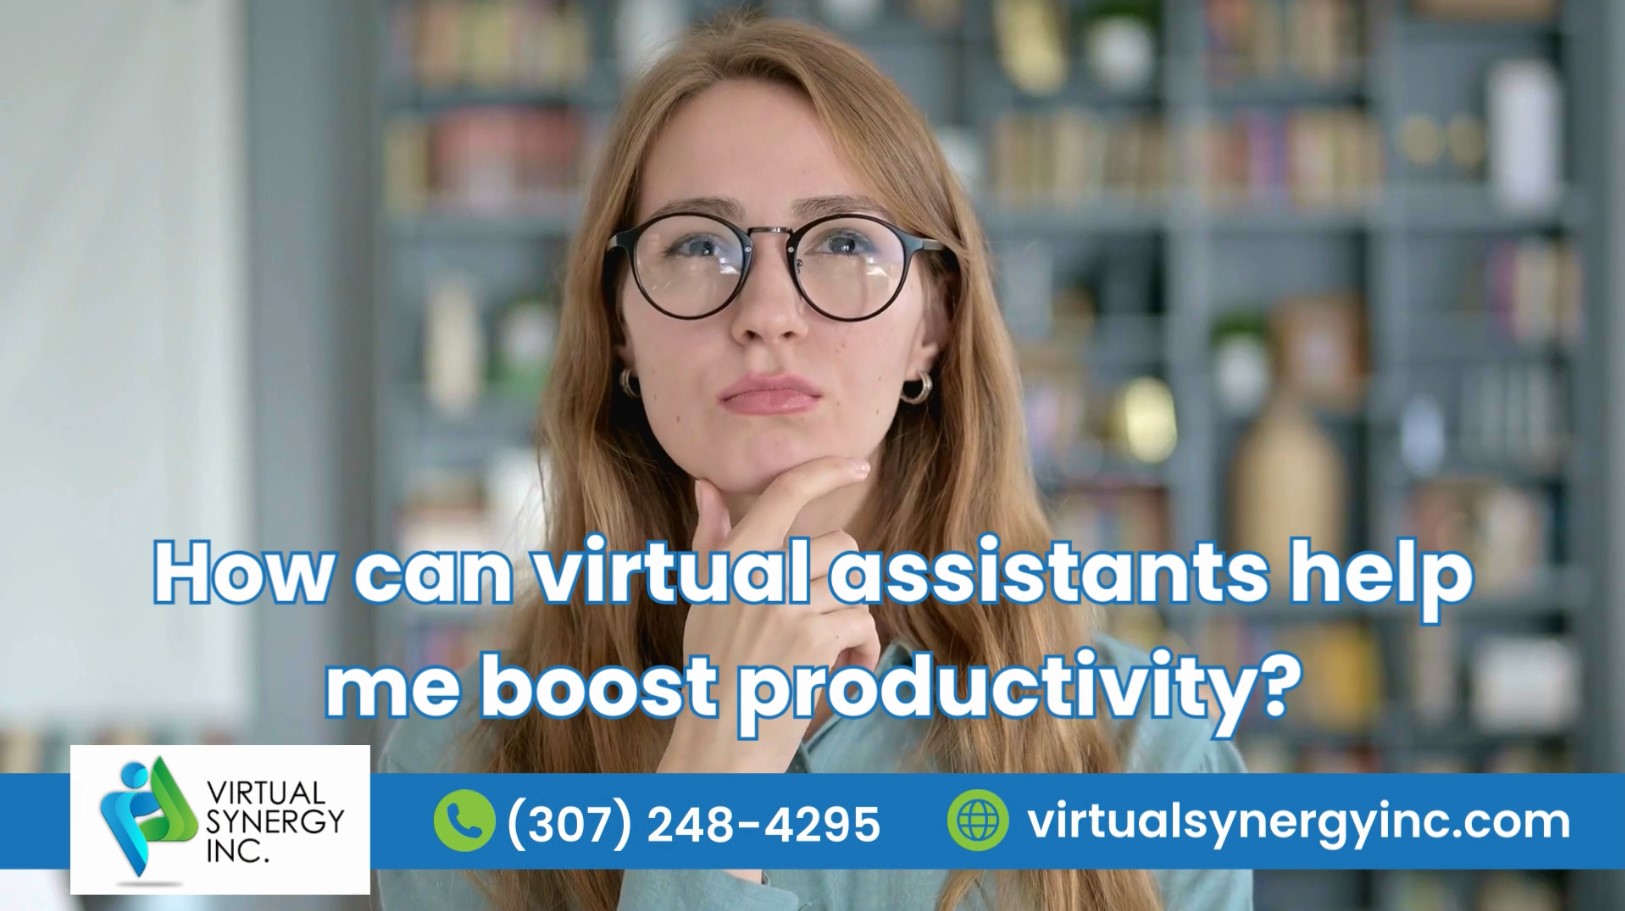 How Can Virtual Assistants Help Me Boost Productivity